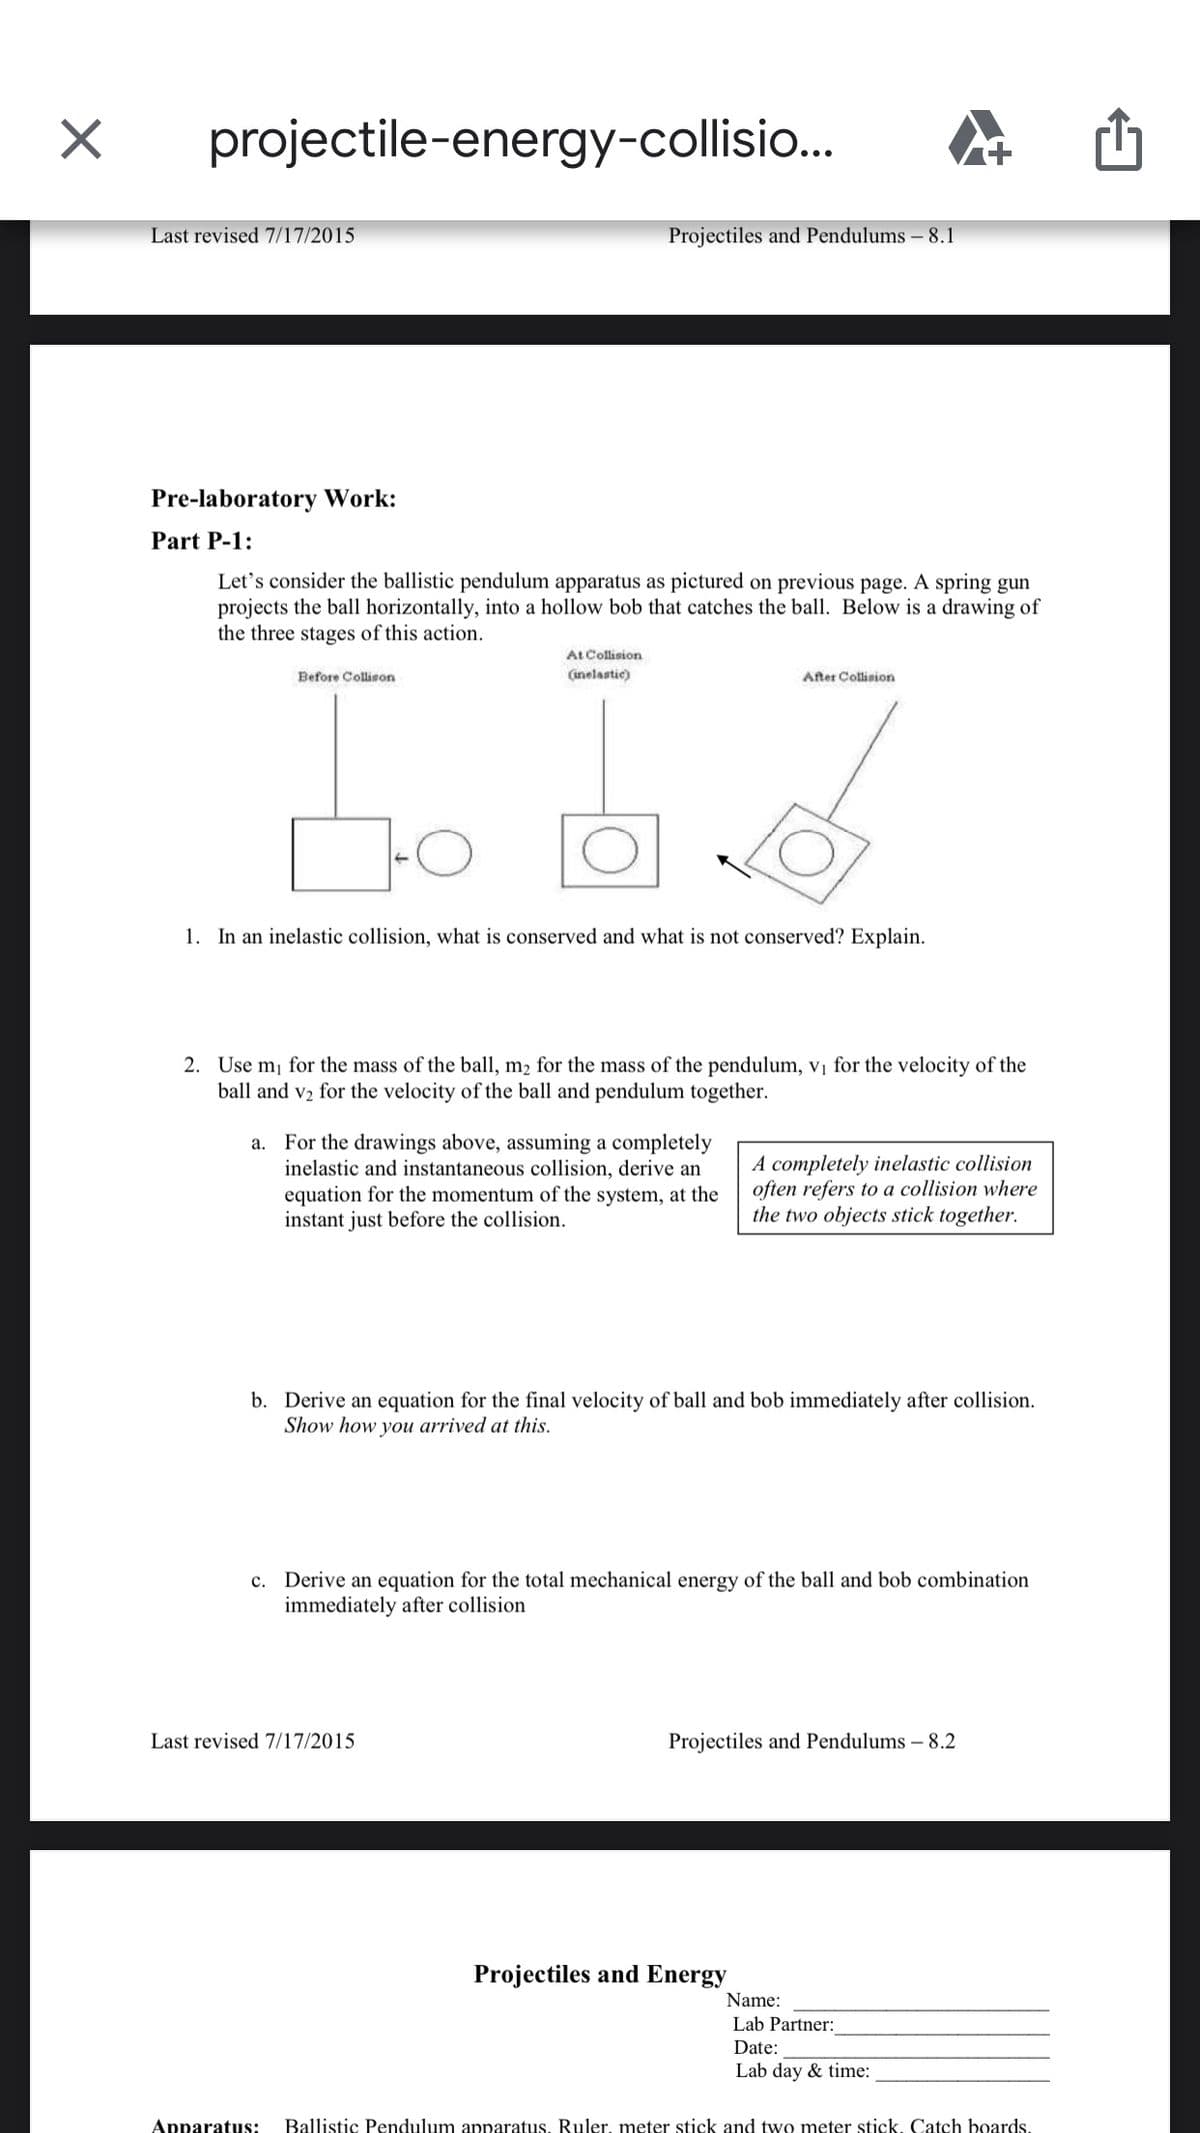 projectile-energy-collisio...
Last revised 7/17/2015
Projectiles and Pendulums – 8.1
Pre-laboratory Work:
Part P-1:
Let's consider the ballistic pendulum apparatus as pictured on previous page. A spring gun
projects the ball horizontally, into a hollow bob that catches the ball. Below is a drawing of
the three stages of this action.
At Collision
(inelastic)
Before Collison
After Collision
1. In an inelastic collision, what is conserved and what is not conserved? Explain.
2. Use mj for the mass of the ball, m2 for the mass of the pendulum, vị for the velocity of the
ball and v2 for the velocity of the ball and pendulum together.
a. For the drawings above, assuming a completely
inelastic and instantaneous collision, derive an
equation for the momentum of the system, at the
instant just before the collision.
A completely inelastic collision
often refers to a collision where
the two objects stick together.
b. Derive an equation for the final velocity of ball and bob immediately after collision.
Show how you arrived at this.
c. Derive an equation for the total mechanical energy of the ball and bob combination
immediately after collision
Last revised 7/17/2015
Projectiles and Pendulums – 8.2
Projectiles and Energy
Name:
Lab Partner:
Date:
Lab day & time:
Apparatus:
Ballistic Pendulum apparatus. Ruler, meter stick and two meter stick. Catch boards.
